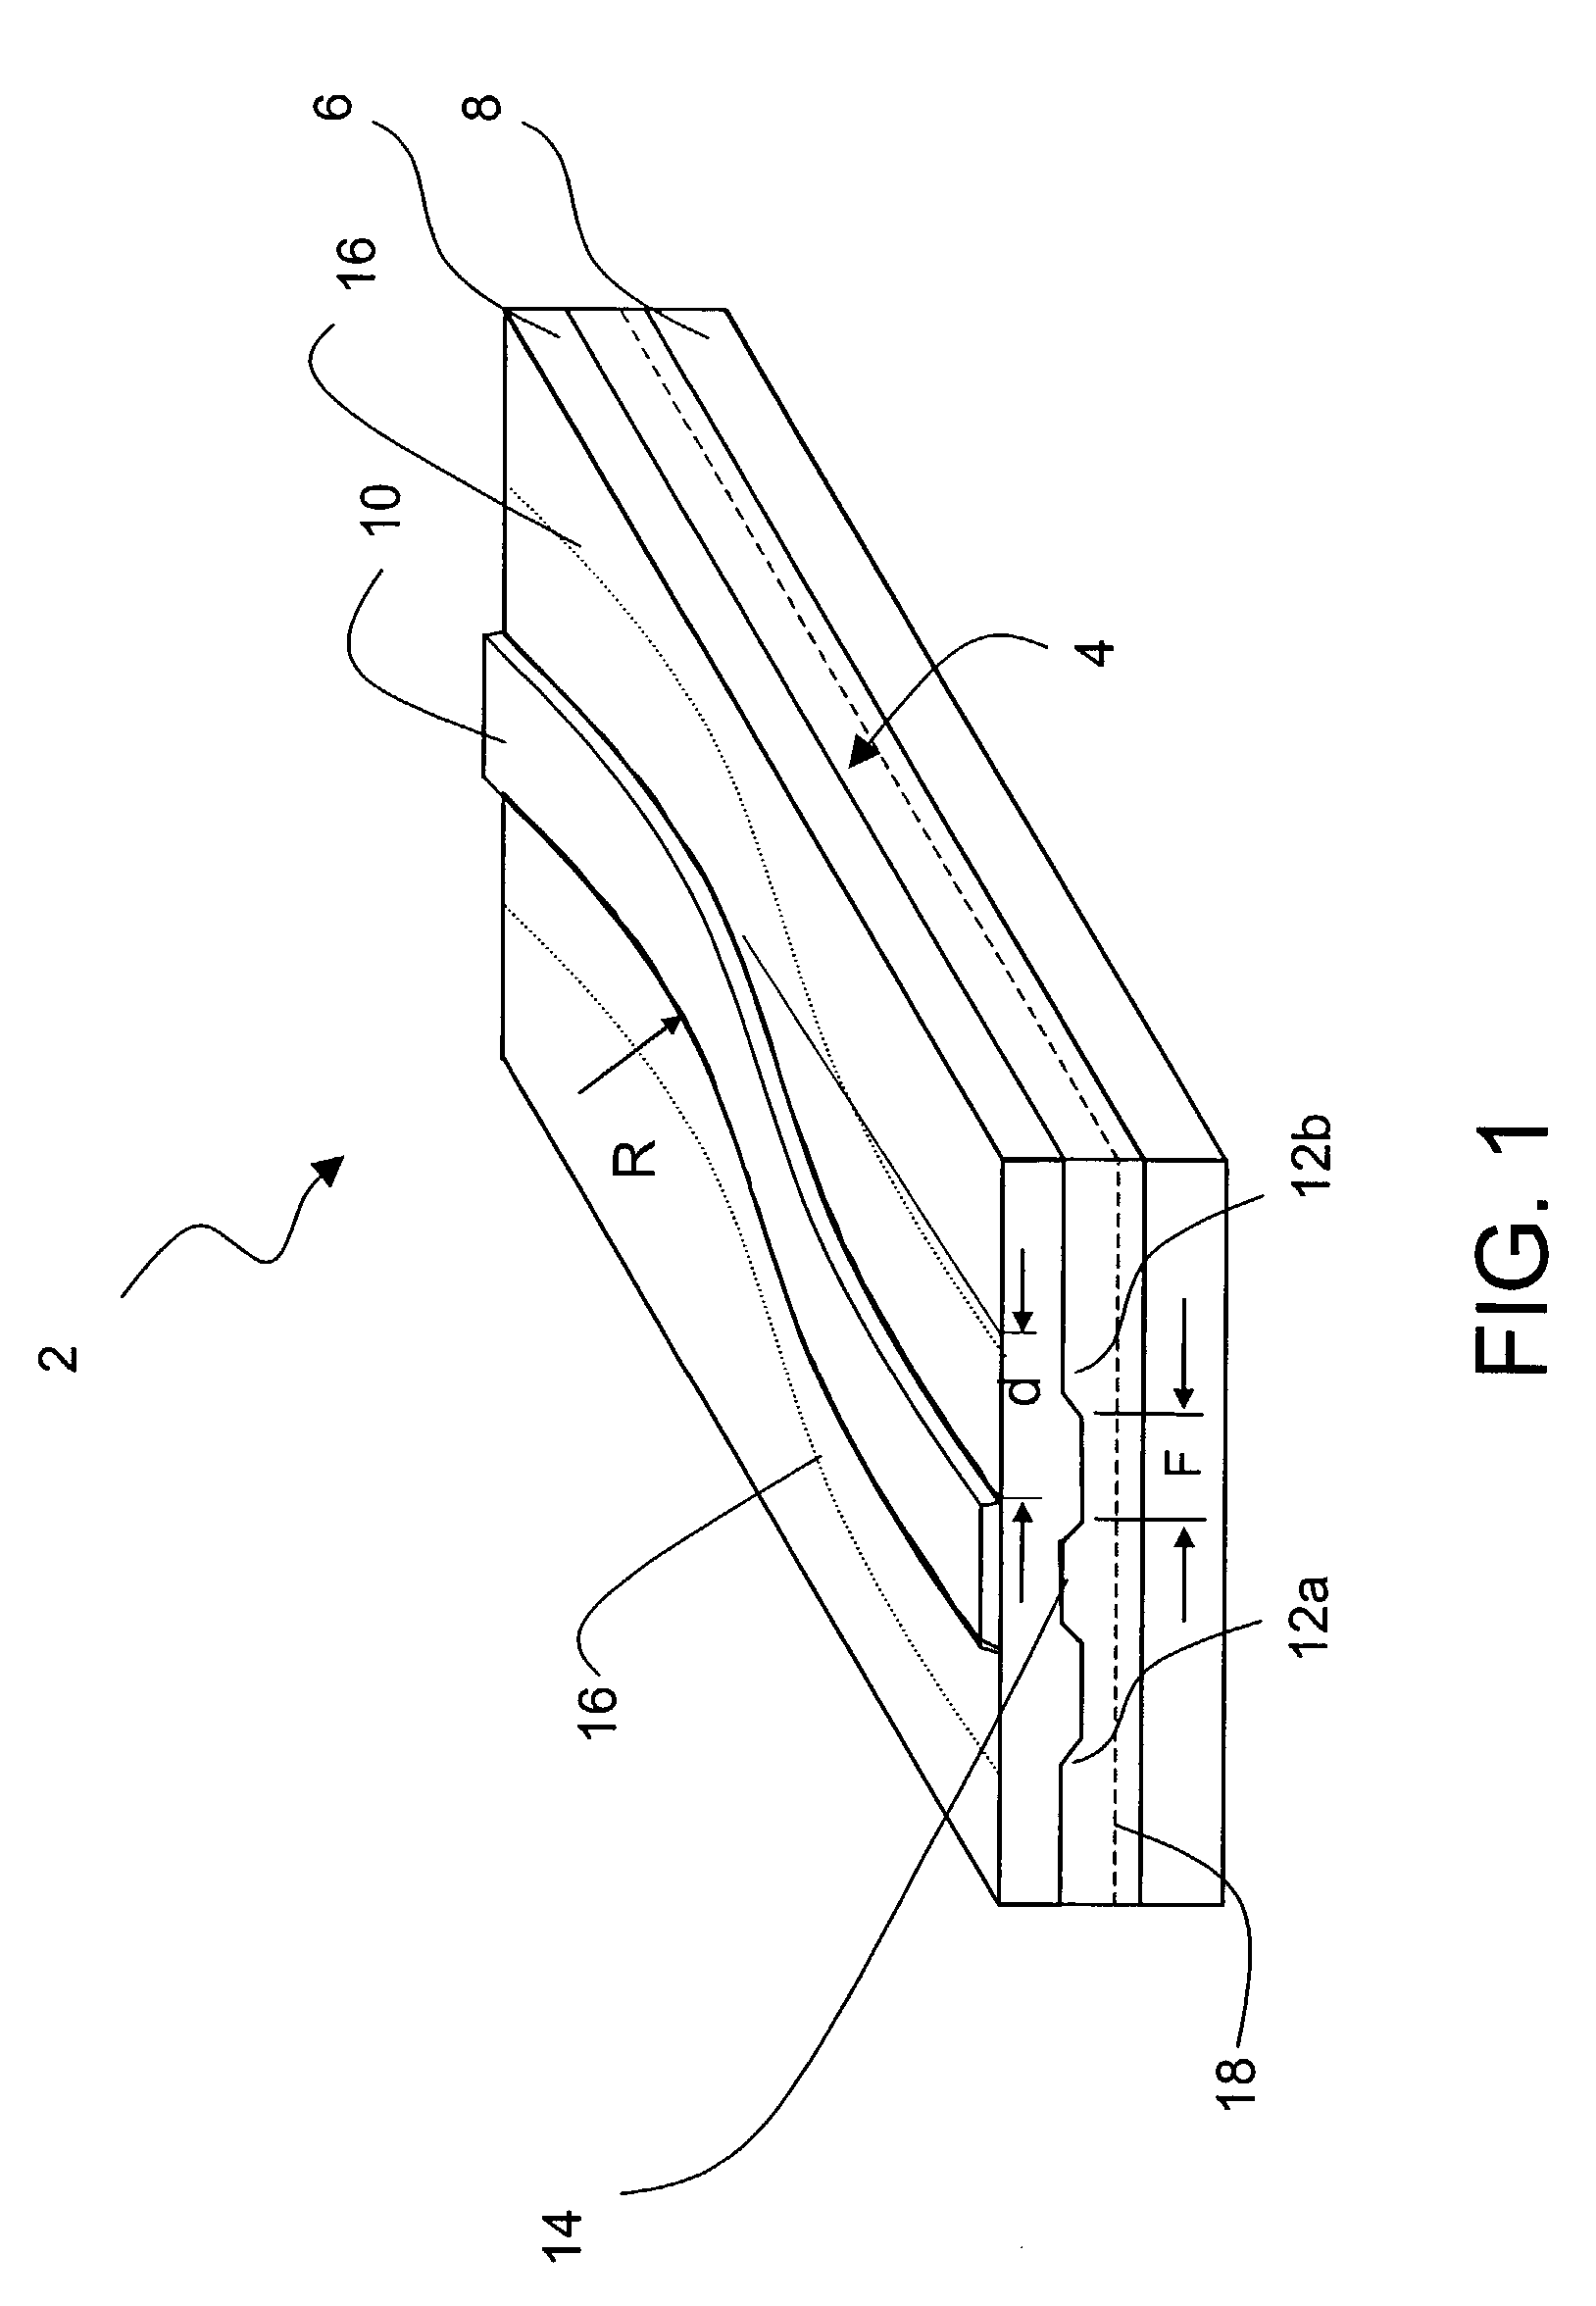 Index guided laser structure